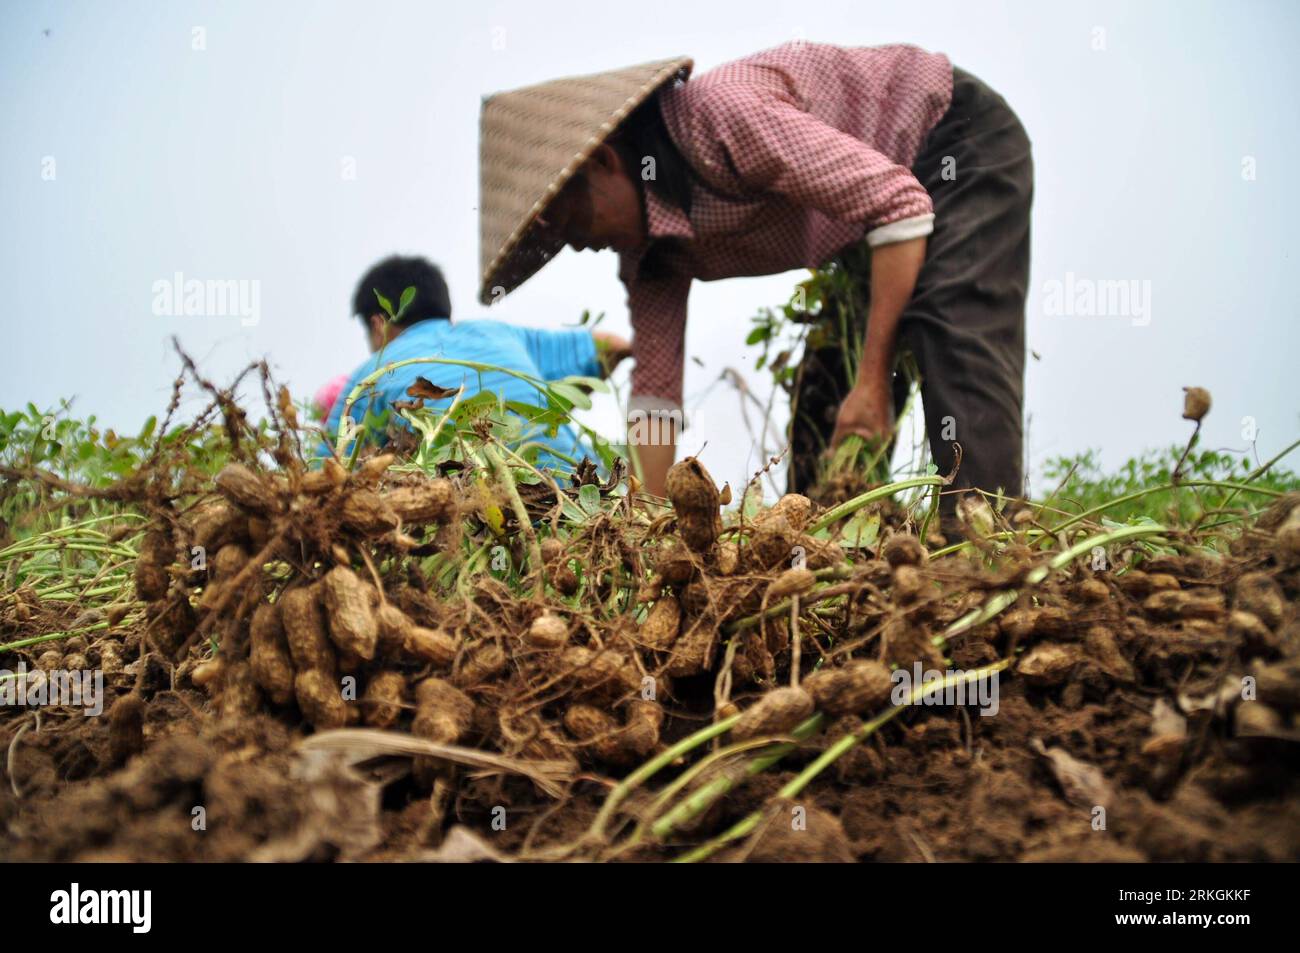 Bildnummer: 55604695  Datum: 18.07.2011  Copyright: imago/Xinhua (110720) -- NANNING, July 20, 2011 (Xinhua) -- A woman harvests peanuts in the field in Nanning City, south China s Guangxi Zhuang Autonomous Region, July 18, 2011. Recently, crops such as early season rice, corn, peanuts come into the harvest season in some parts of China. (Xinhua/Lu Bo an) (zl) CHINA-AGRICULTURE-HARVEST(CN) PUBLICATIONxNOTxINxCHN Wirtschaft Gesellschaft Bauern Ernte xsk 2011 quer  o0 Erdnüsse Arbeitswelten Feld Landwirtschaft    Bildnummer 55604695 Date 18 07 2011 Copyright Imago XINHUA  Nanning July 20 2011 XI Stock Photo